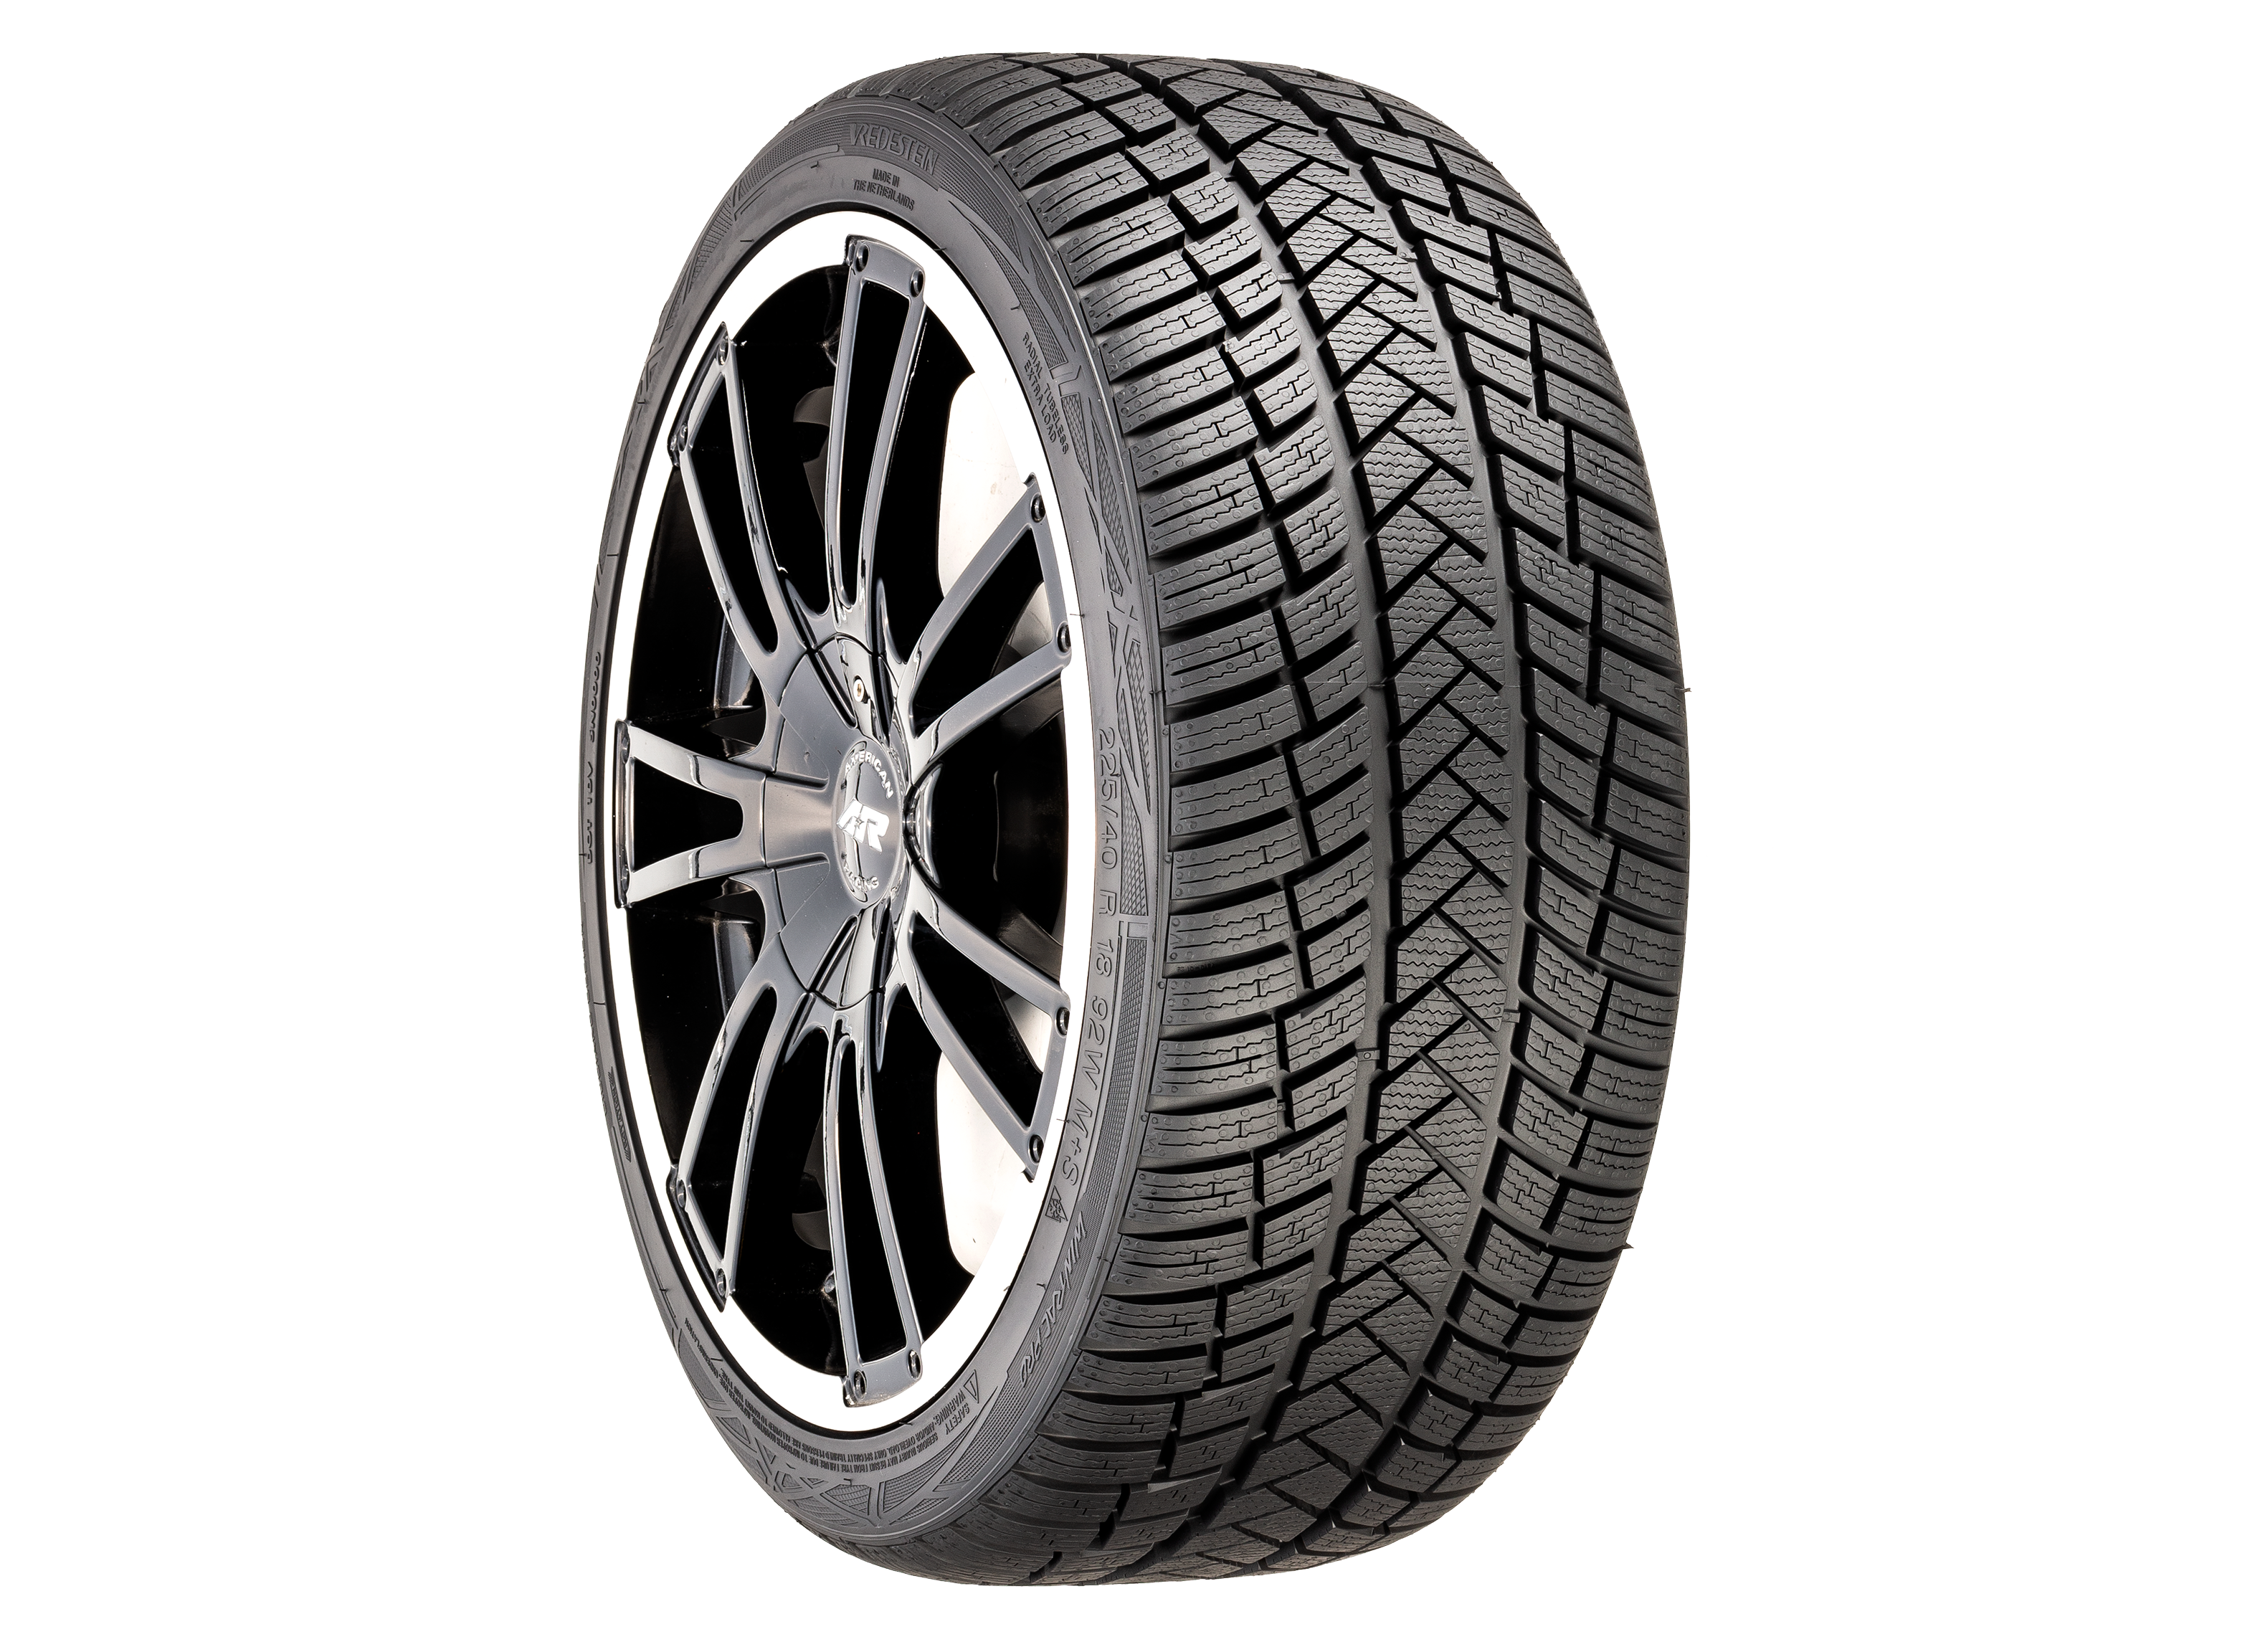 Vredestein Wintrac Pro Tire Review - Consumer Reports